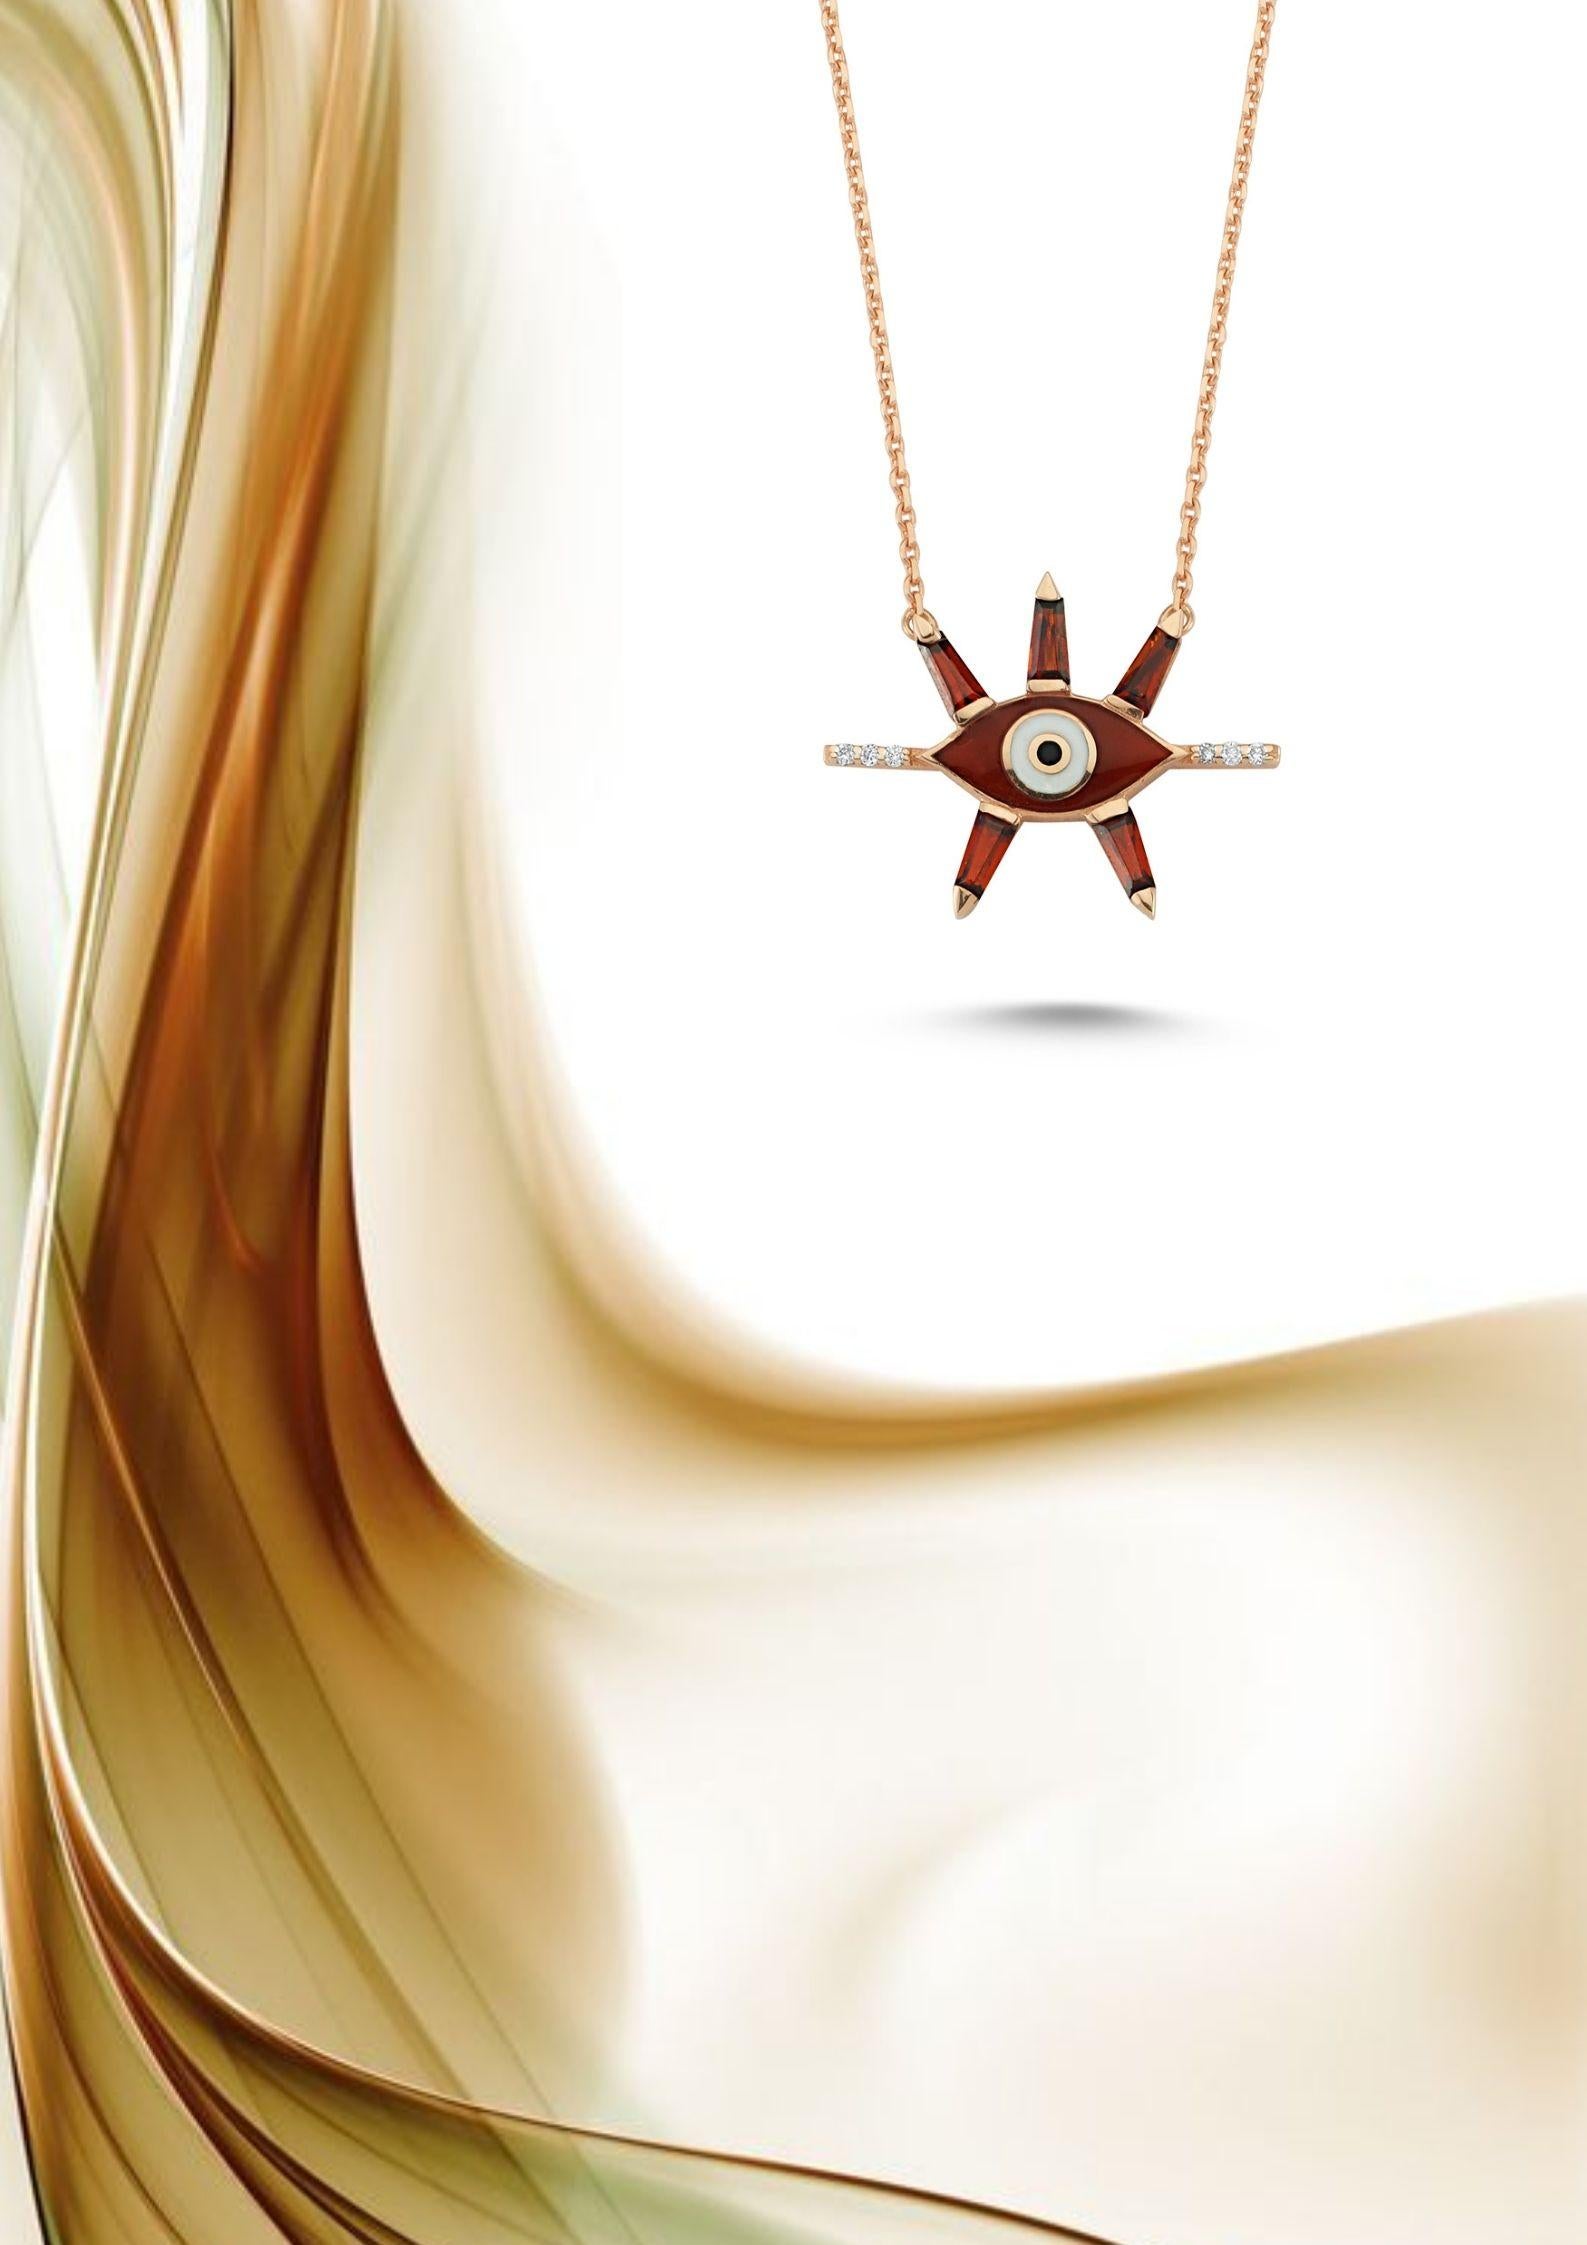 Evil eye necklace with garnet, enamel & 0.03ct white diamond by Selda Jewellery

Additional Information:-
Collection: Art of giving collection
14K Rose gold
0.03ct White diamond
Chain length 43cm
Pendant height 1.5cm